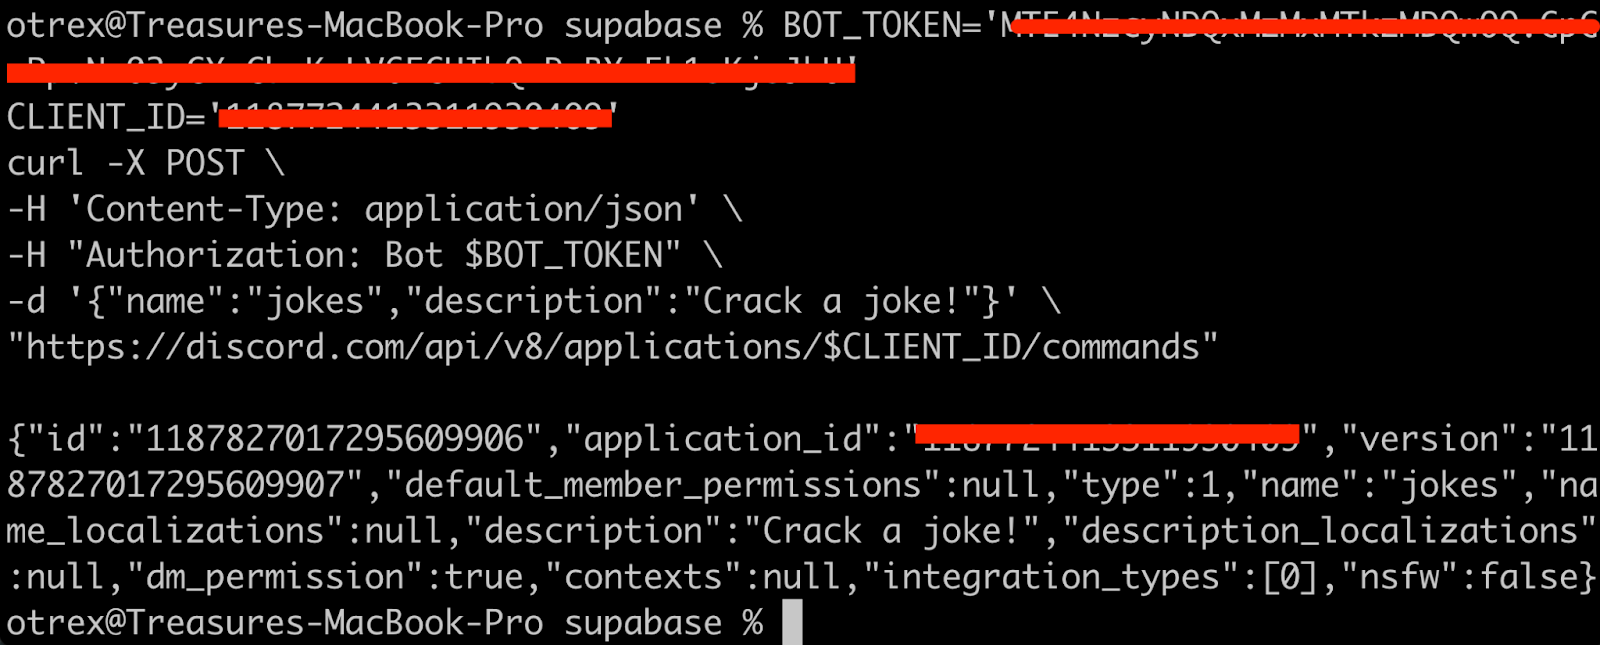 Appropriate BOT_TOKEN and CLIENT_ID